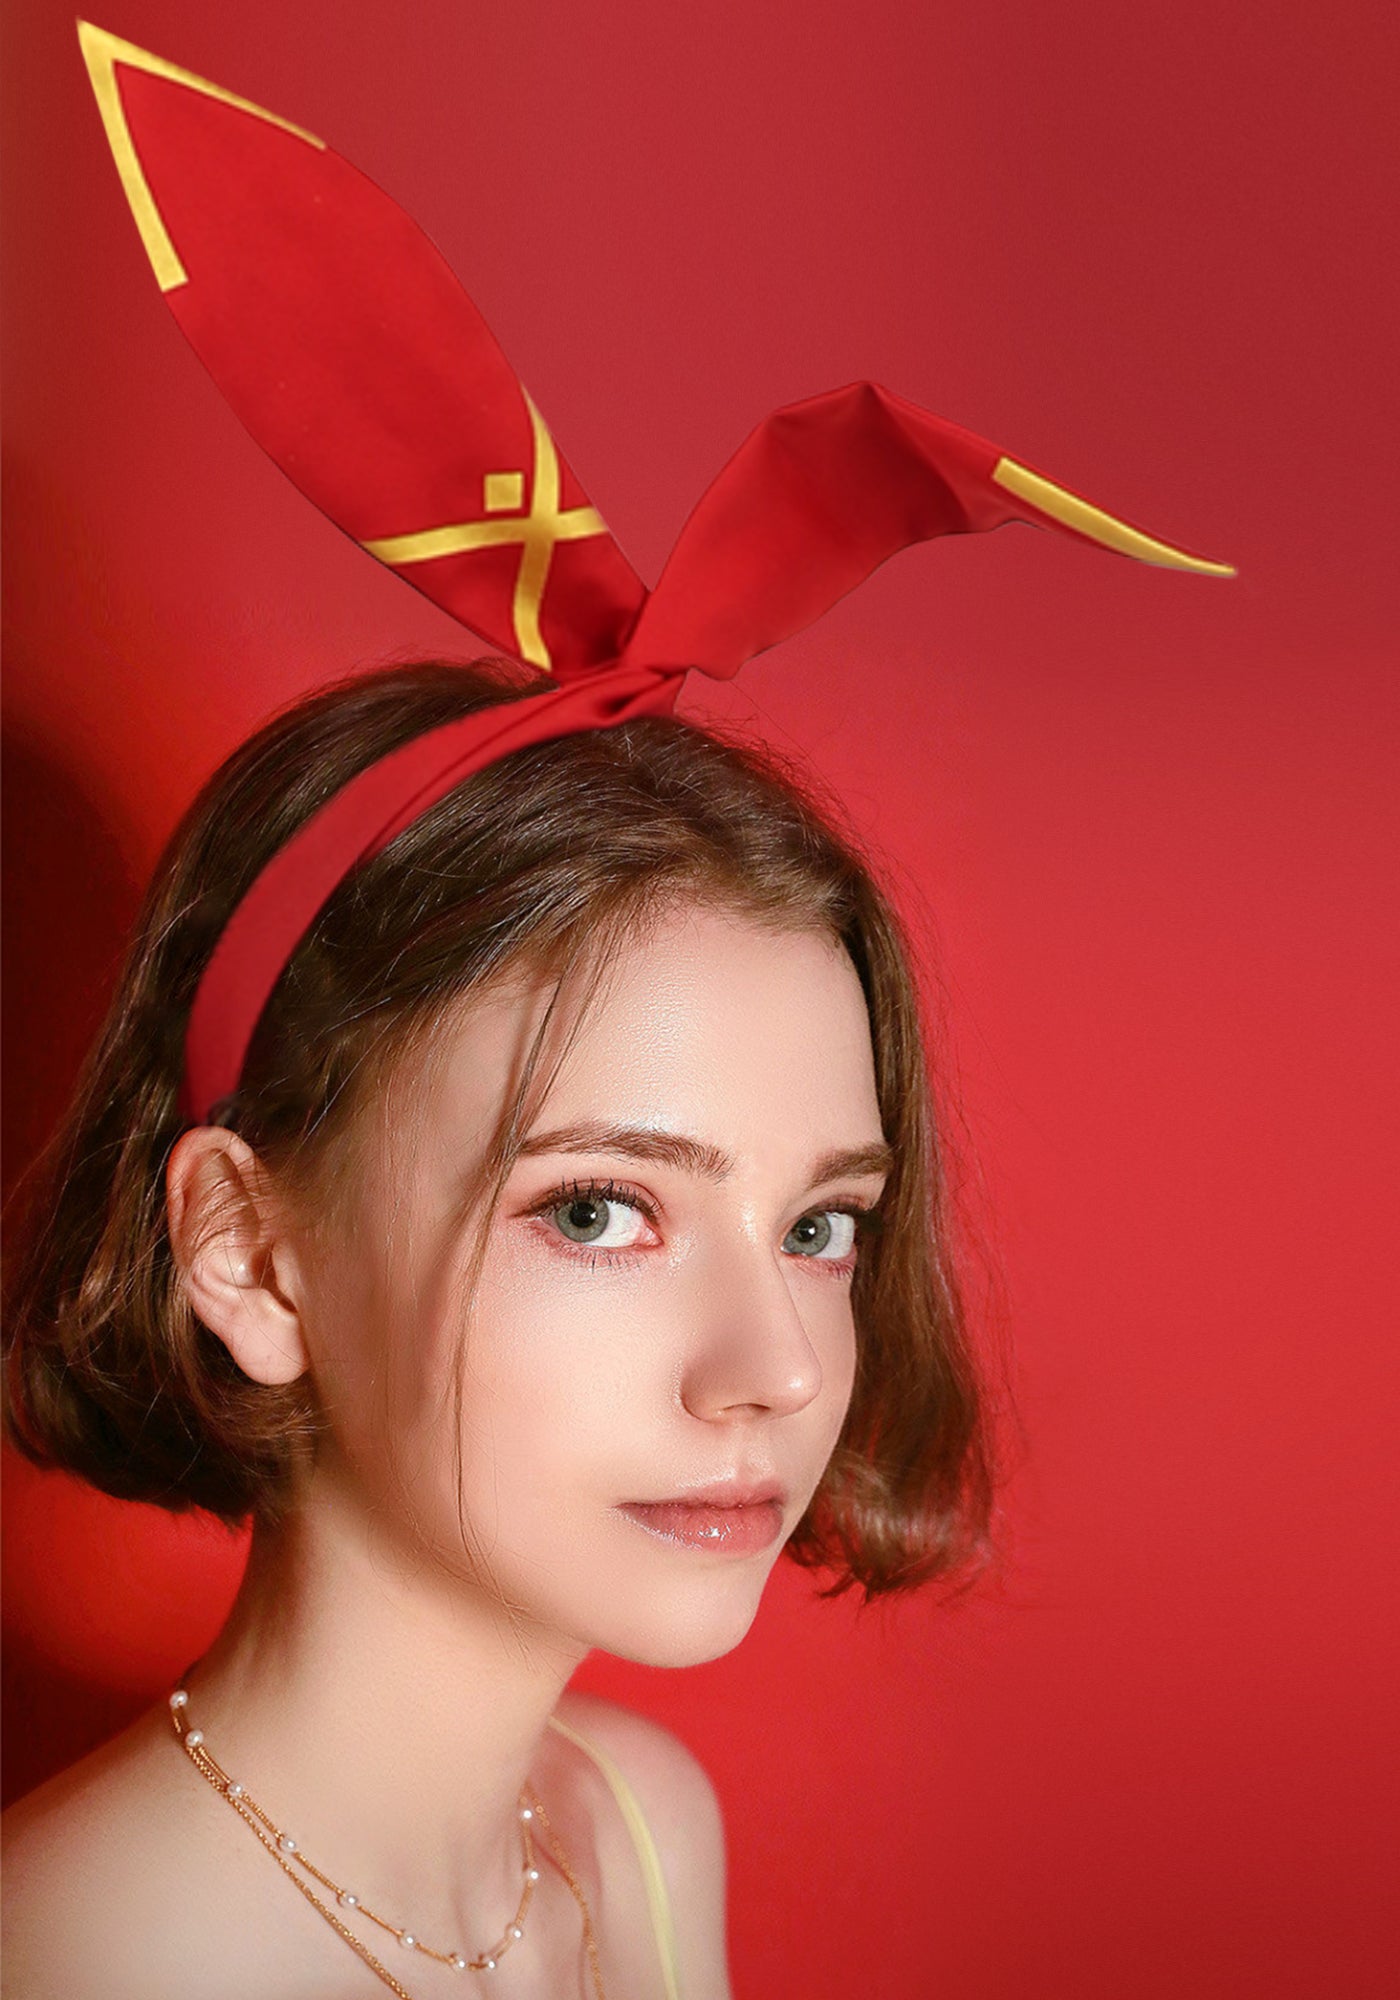 Amber Headband Red Bunny Ear Hairband for Women Cosplay Accessory and Daily